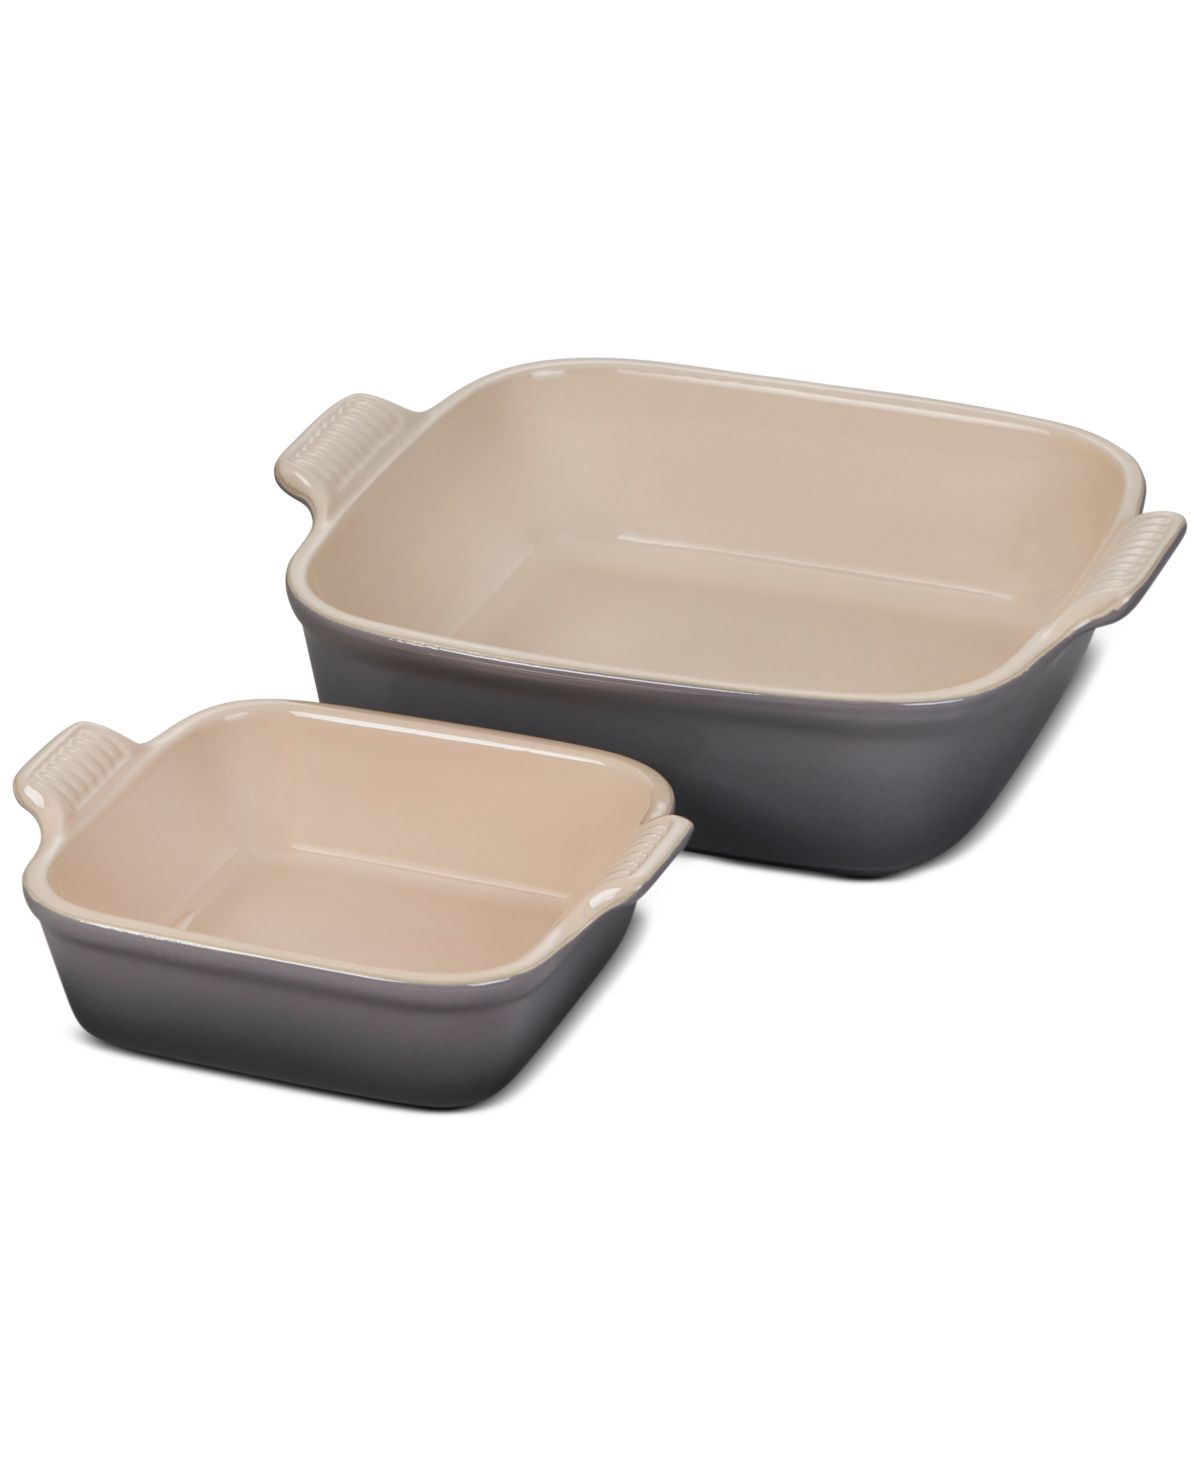 Le Creuset Heritage Square Baking Dishes, Set of 2 | Macys (US)